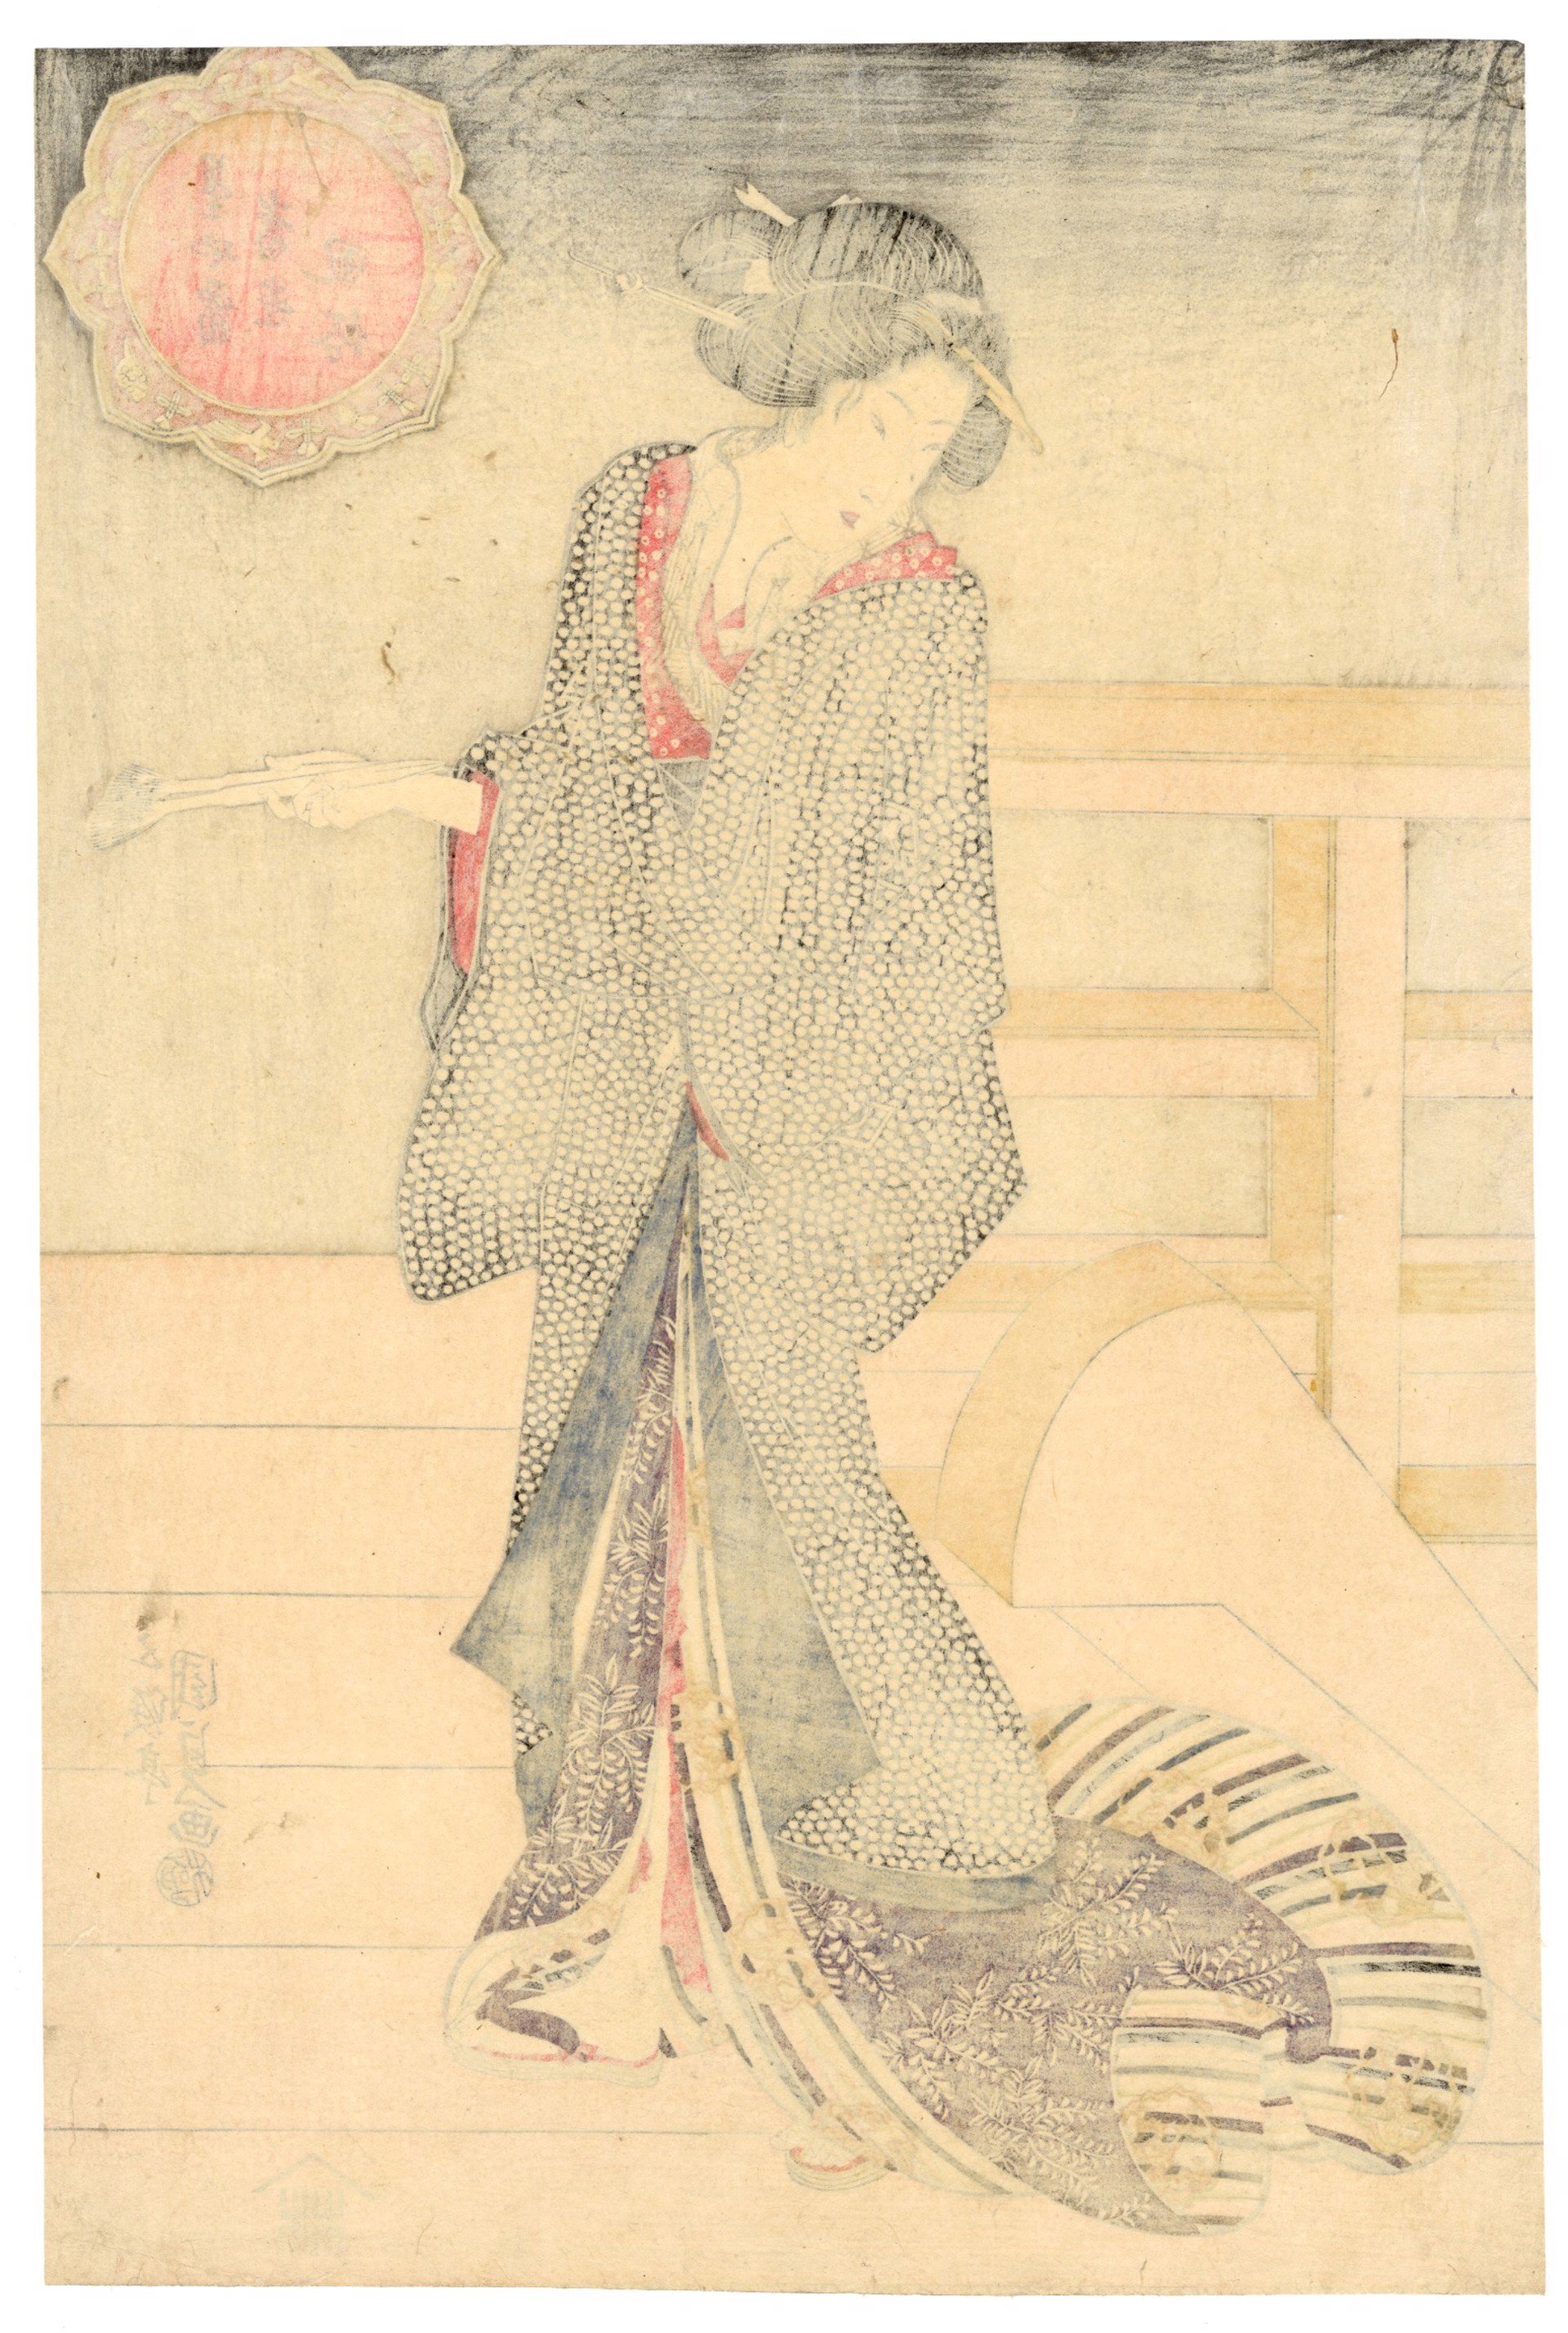 Bijin Holding Tooth Brushes by Kunisada